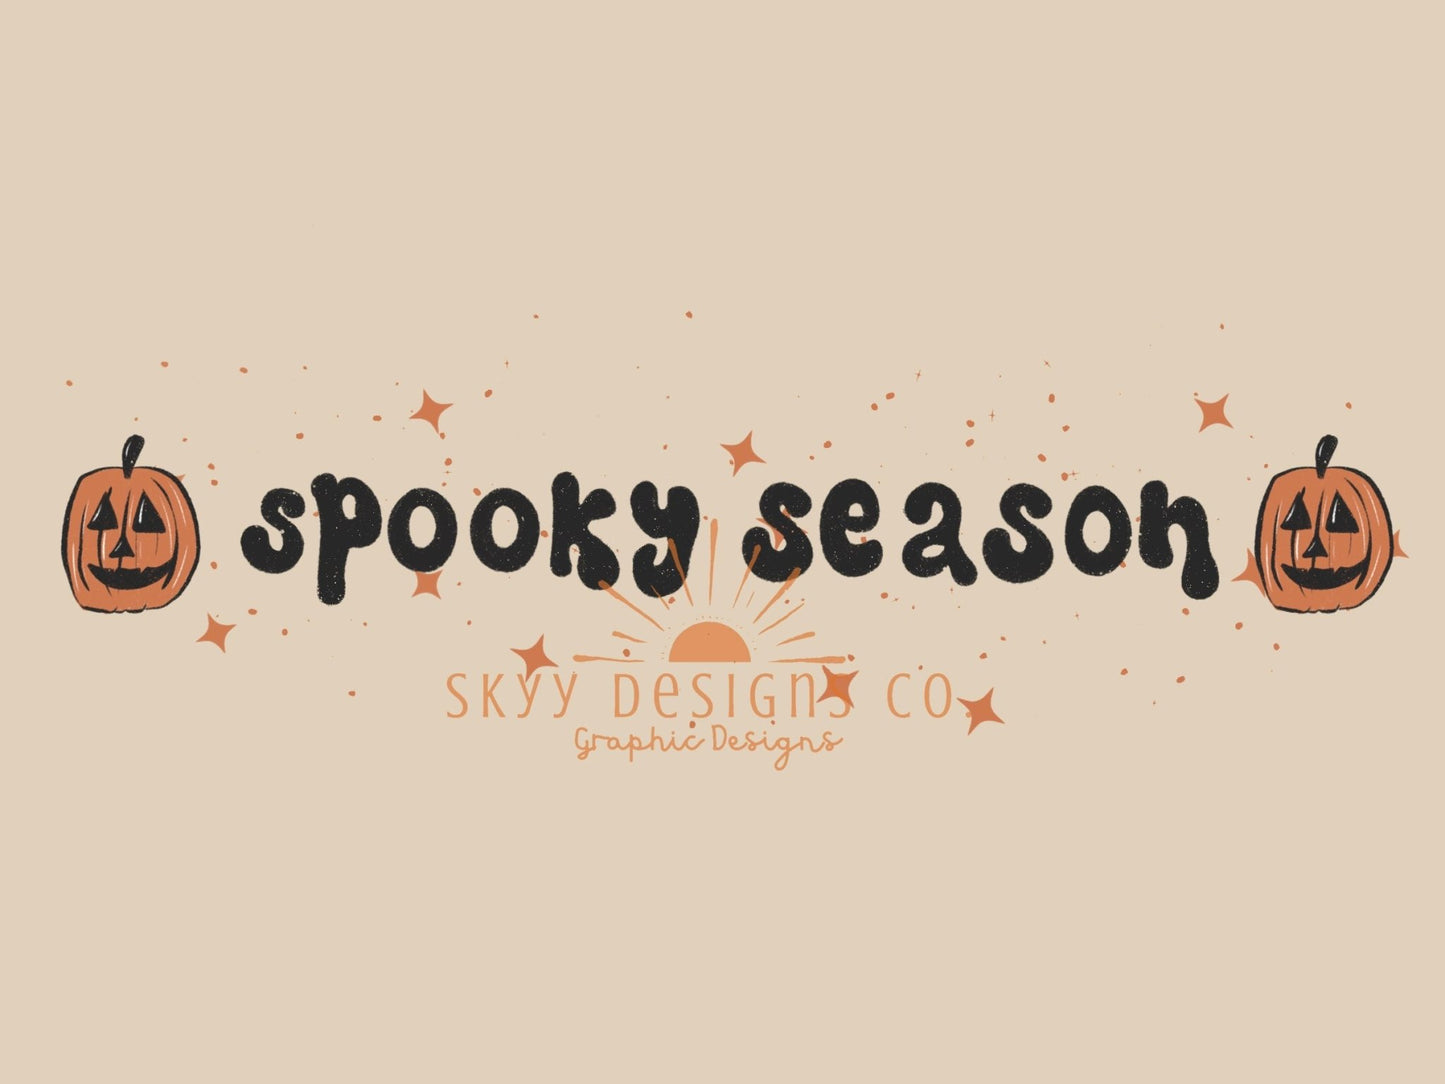 Spooky season Png, fall Png, Spooky Png for T shirt, Halloween Png design, Fall Png, Spooky Babe Png, Pumpkin Png - SkyyDesignsCo